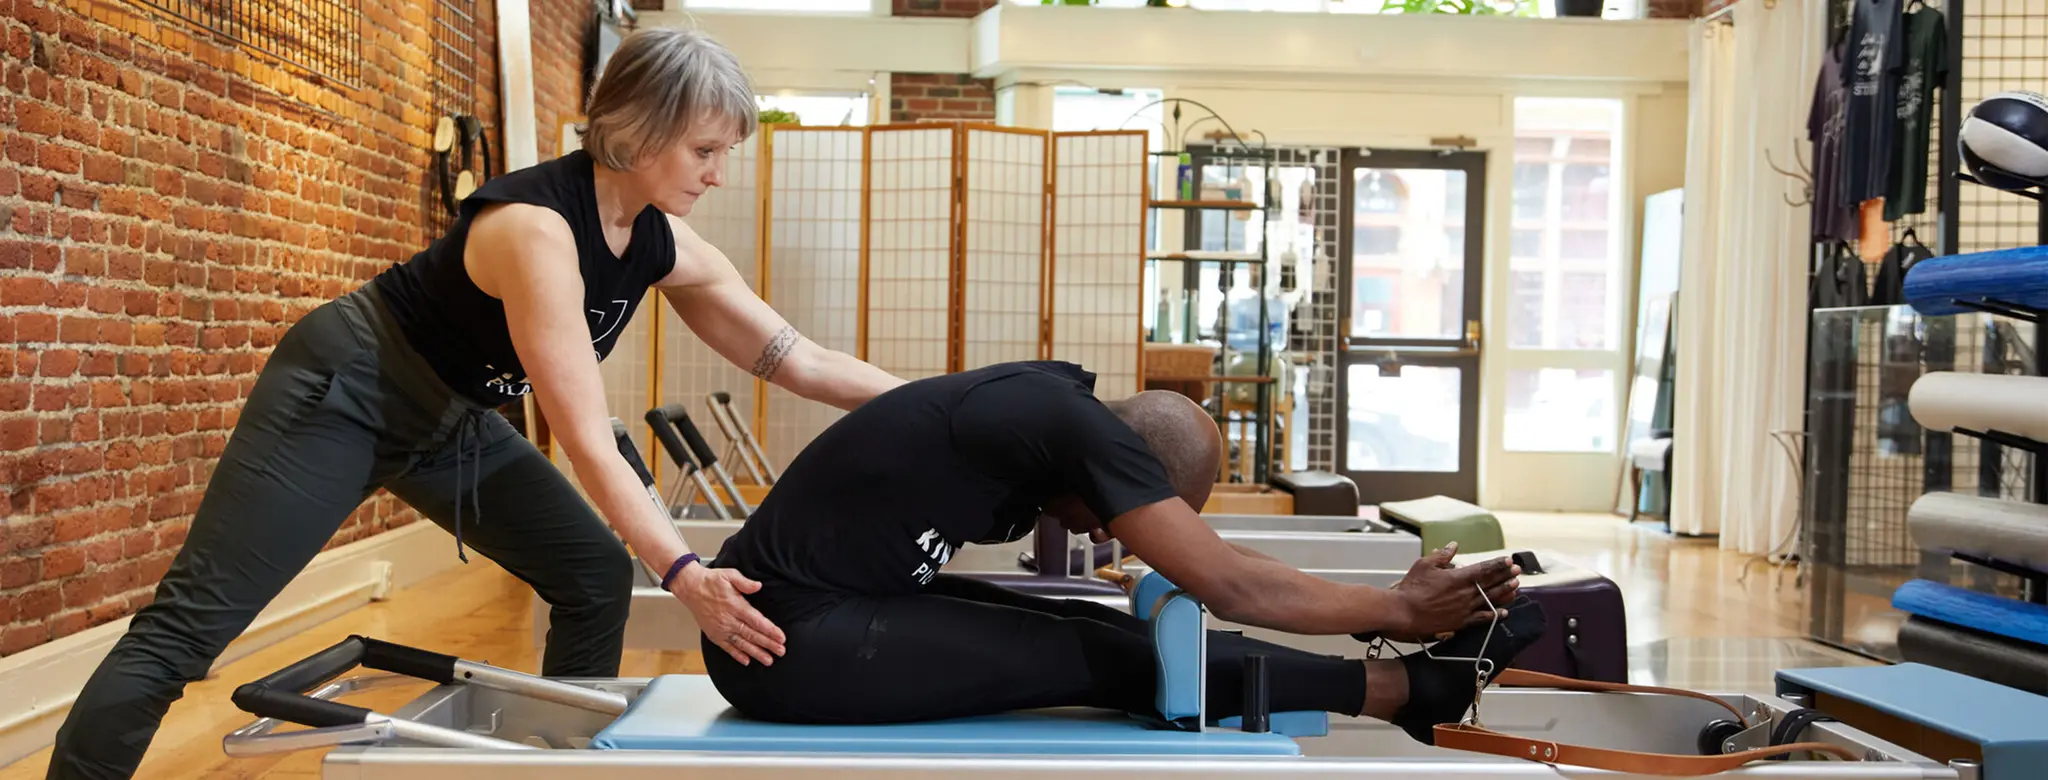 Become a Pilates Instructor - Fitness Career Guide